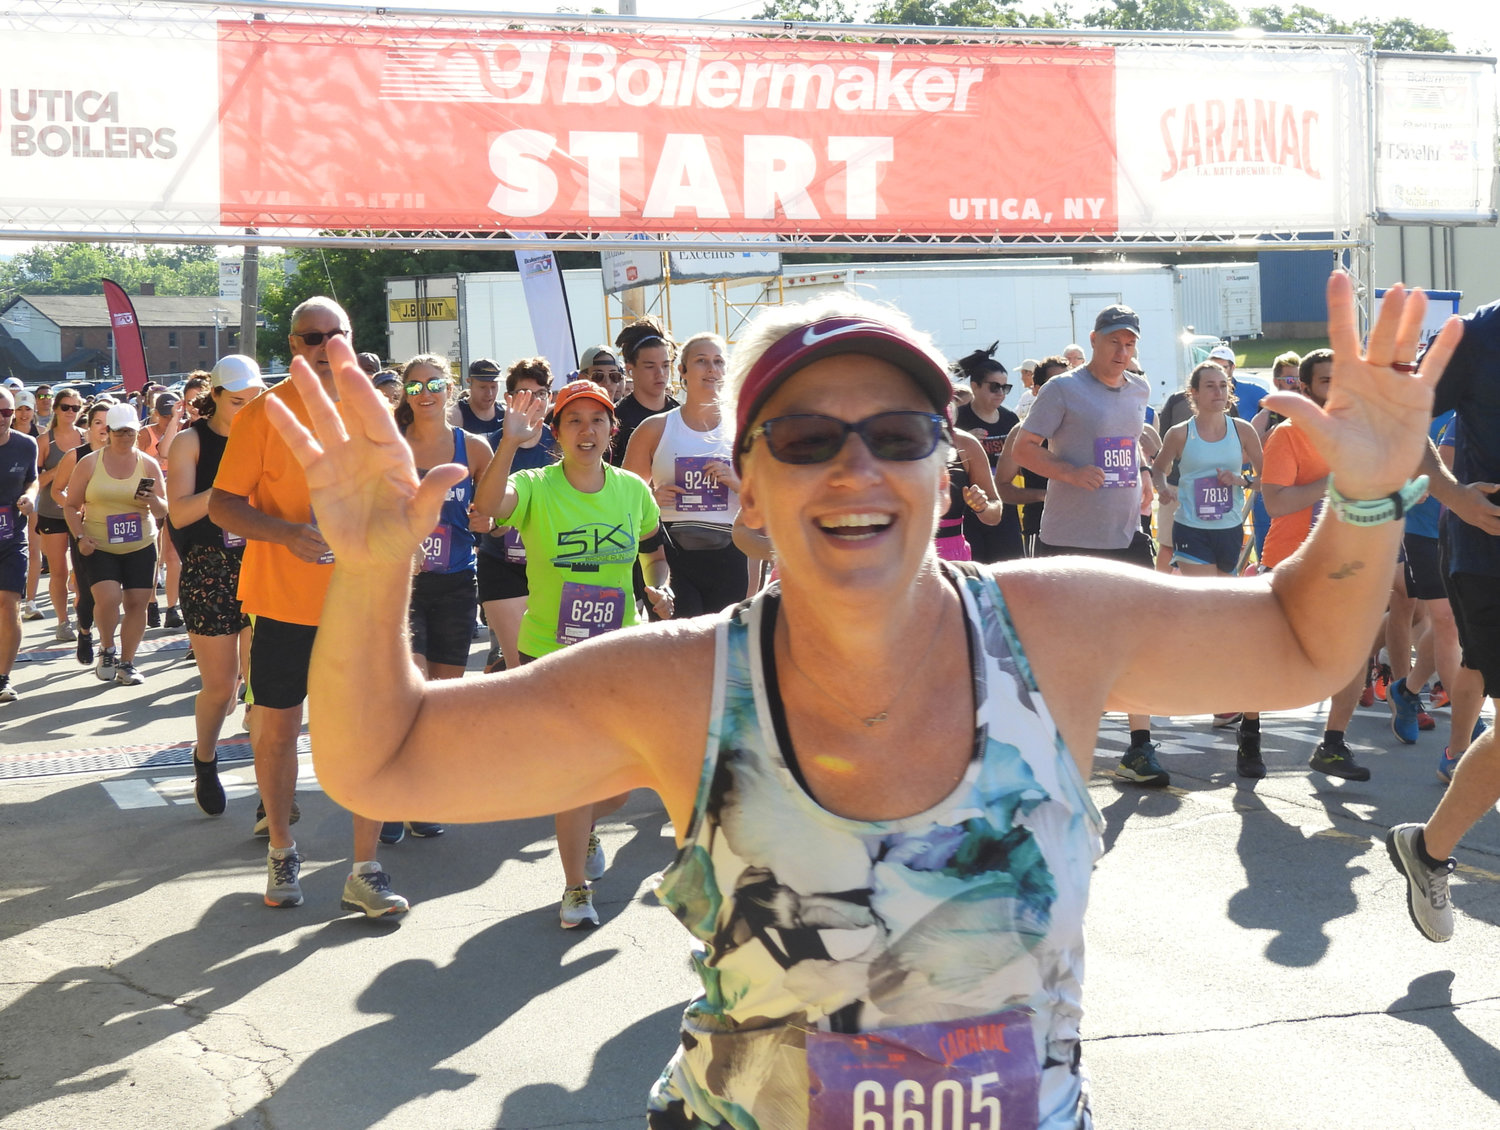 Runners take off from the starting line for the 45th Boilermaker Road Race on Sunday, July 10 in Utica.